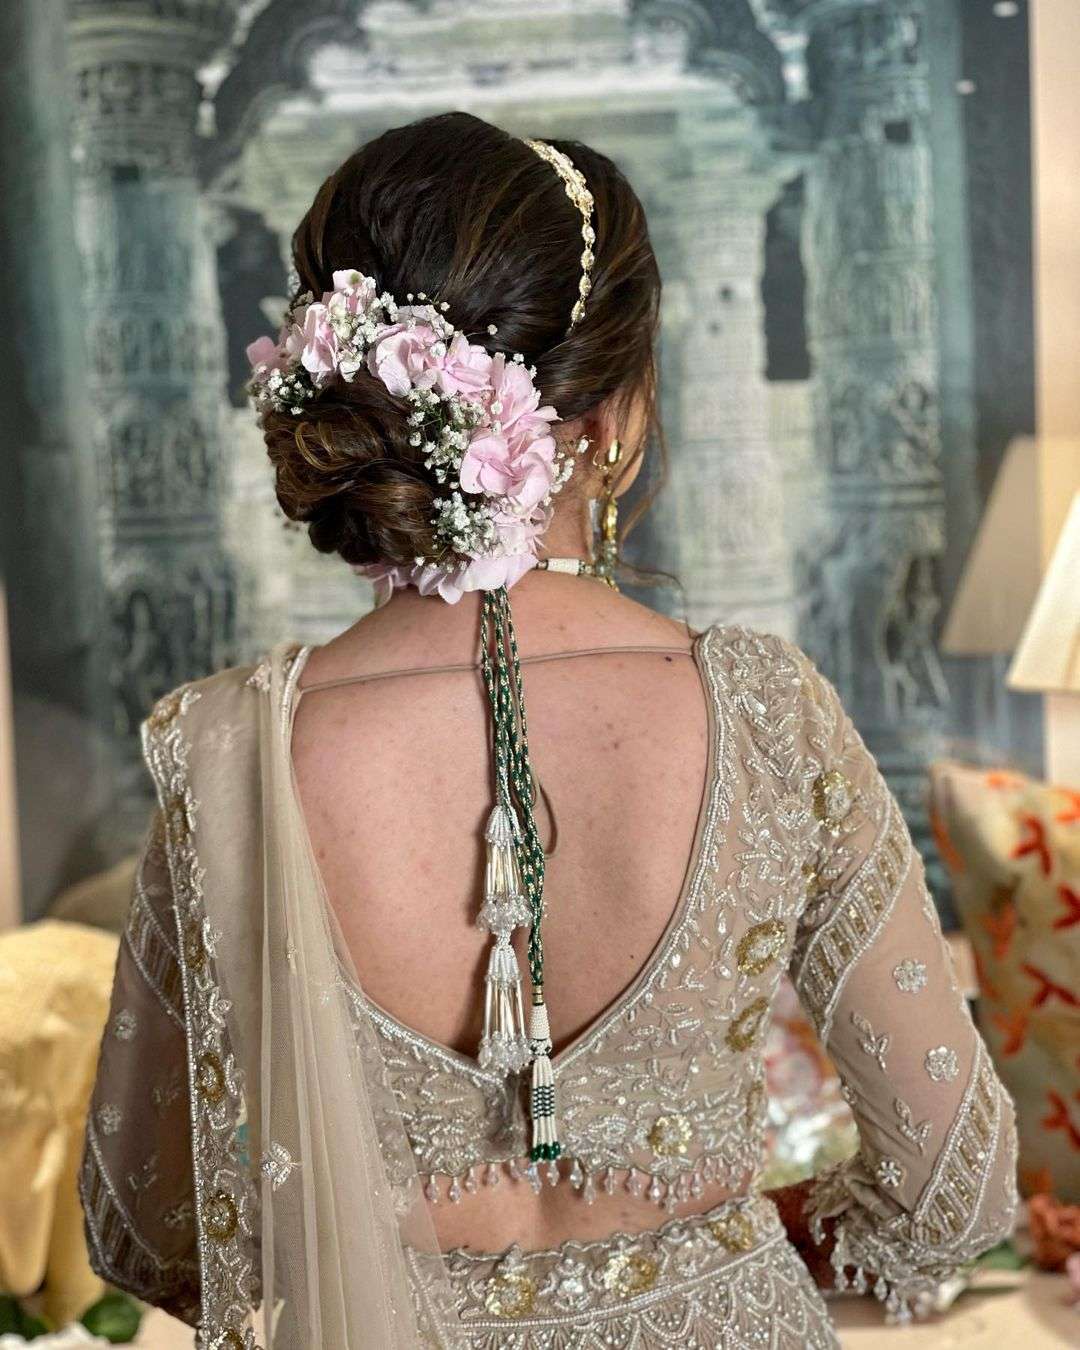 Bridal Juda Hairstyles You Are Going To Love! | A bride's hairstyle is as  important as any other element to complete the bridal look. While brides  are now opting for various kinds